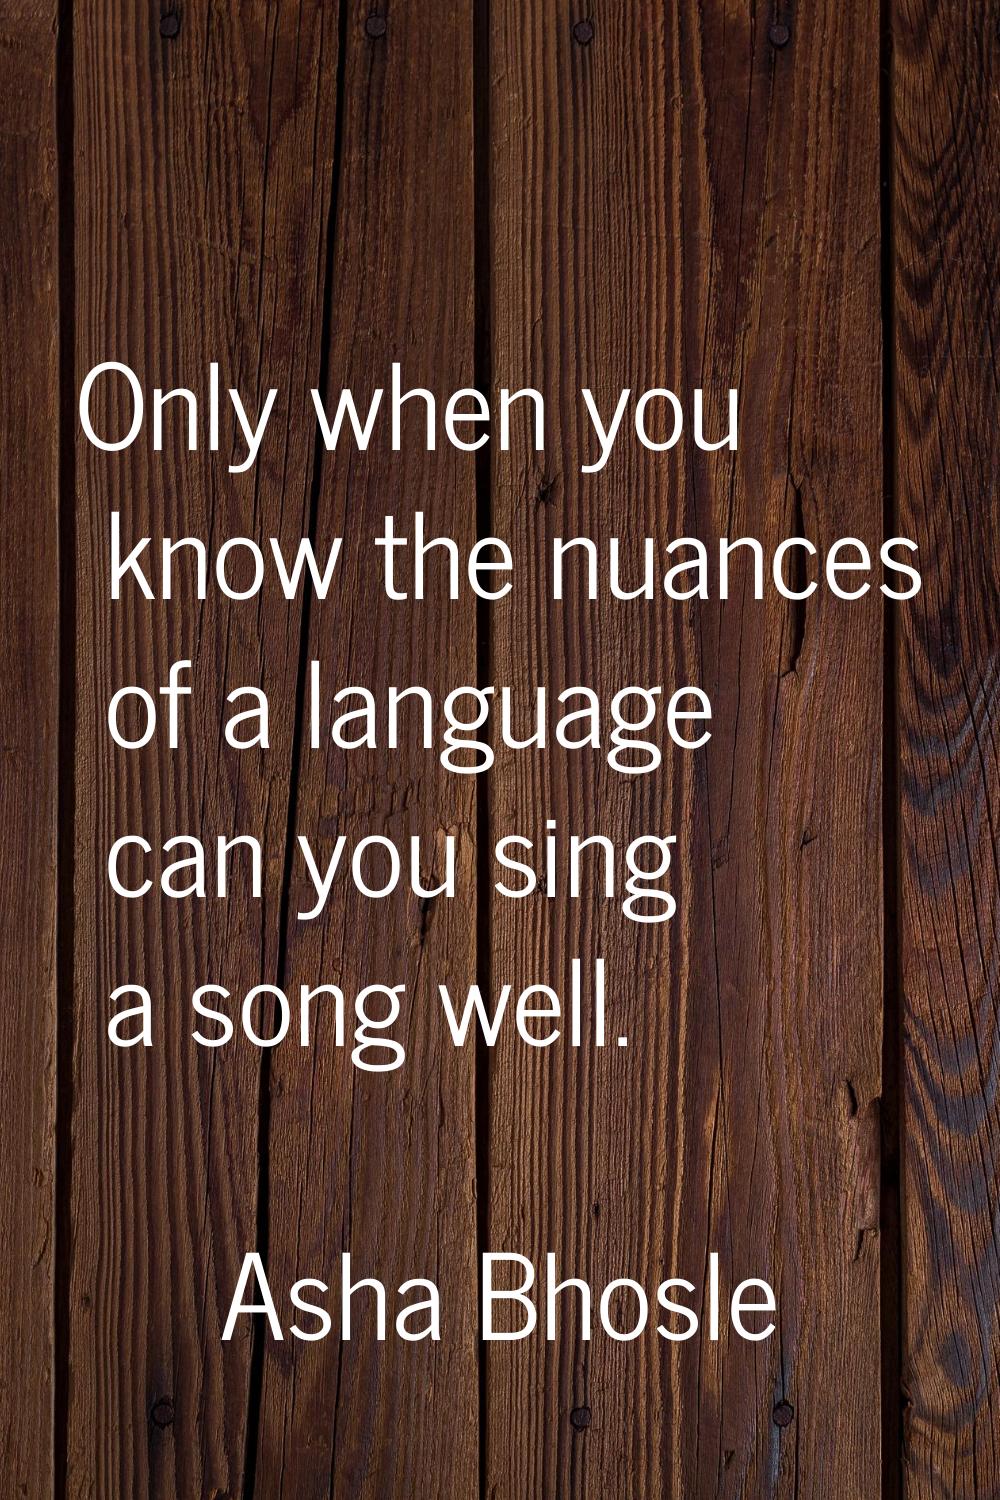 Only when you know the nuances of a language can you sing a song well.